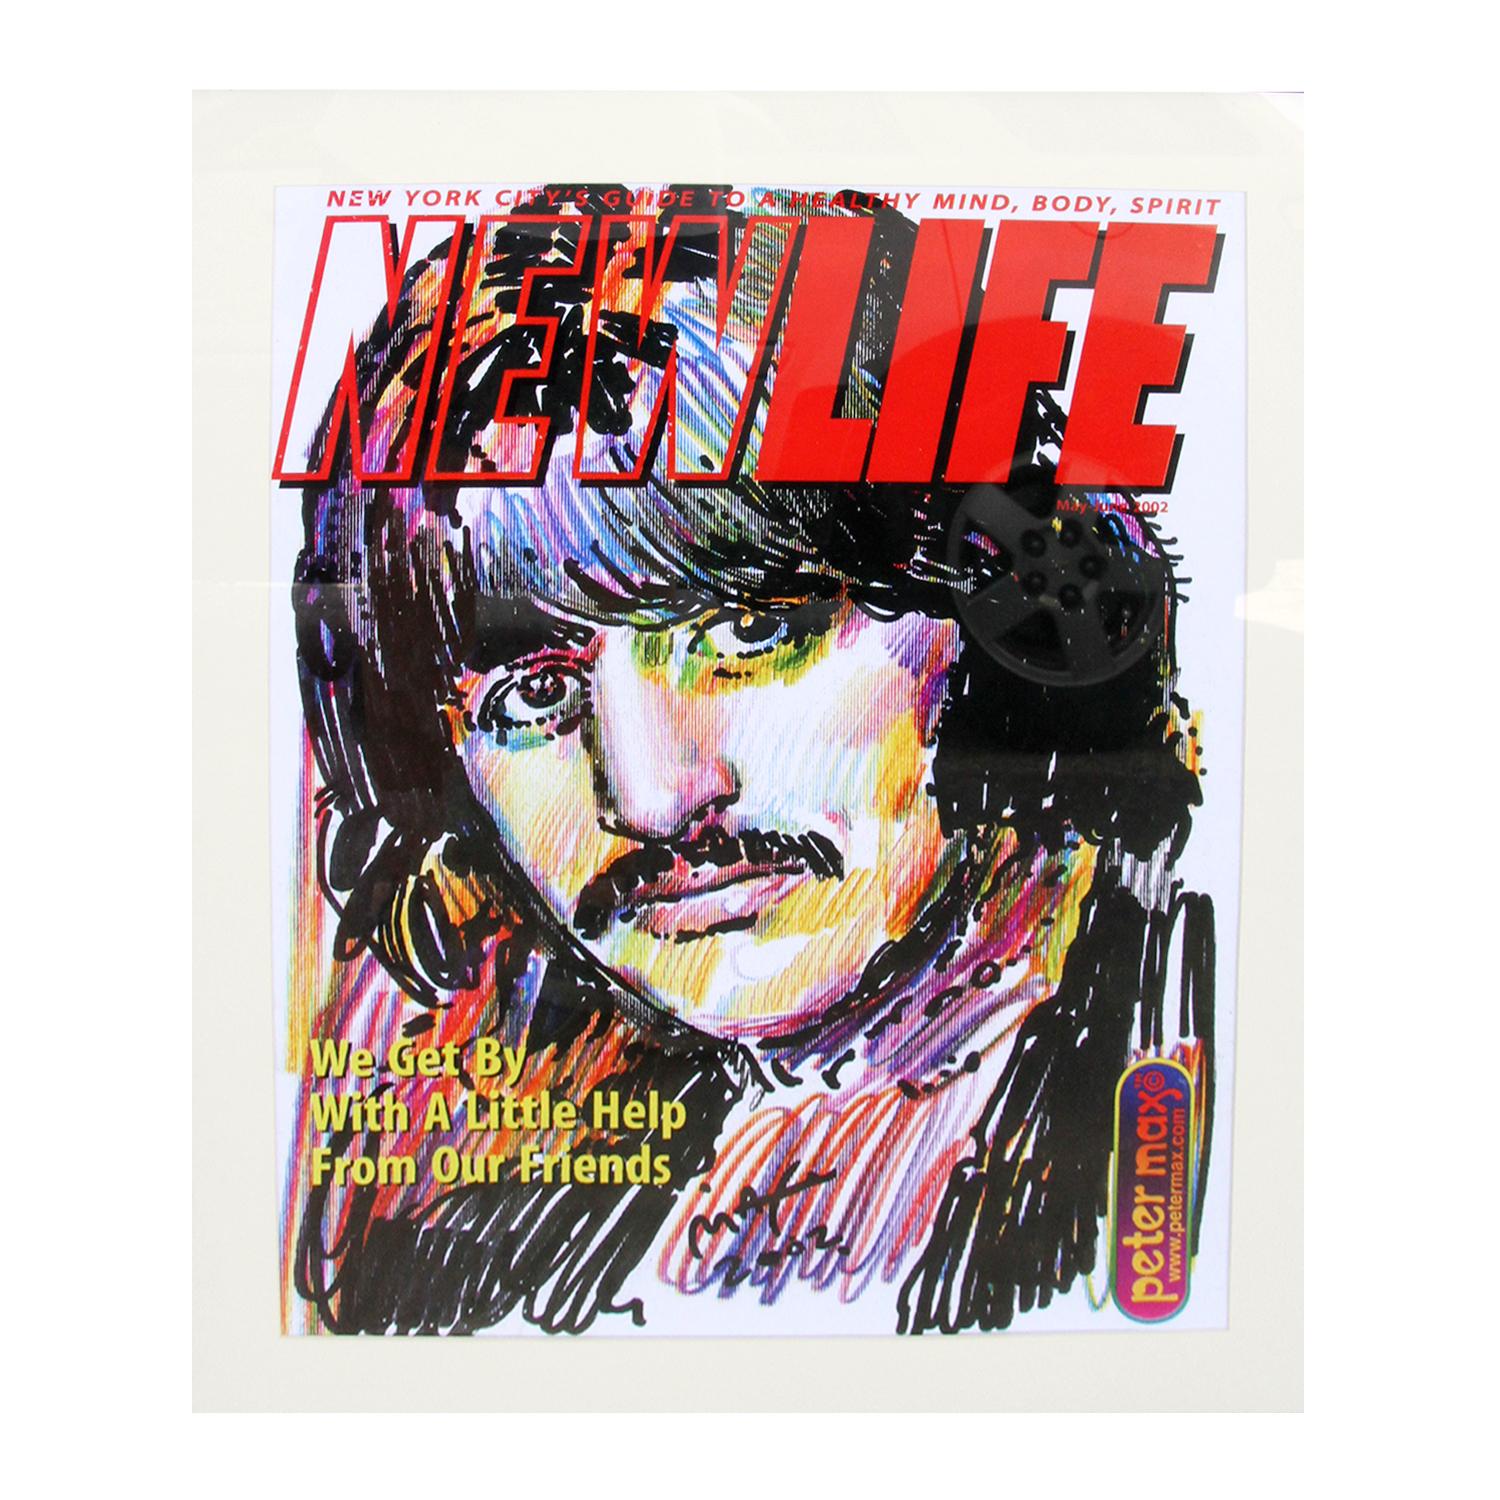 Ringo starr by Peter Max for the cover of new life

Issue 85 of the New Life magazine, published in 2002 in New York. 

Measures: 28